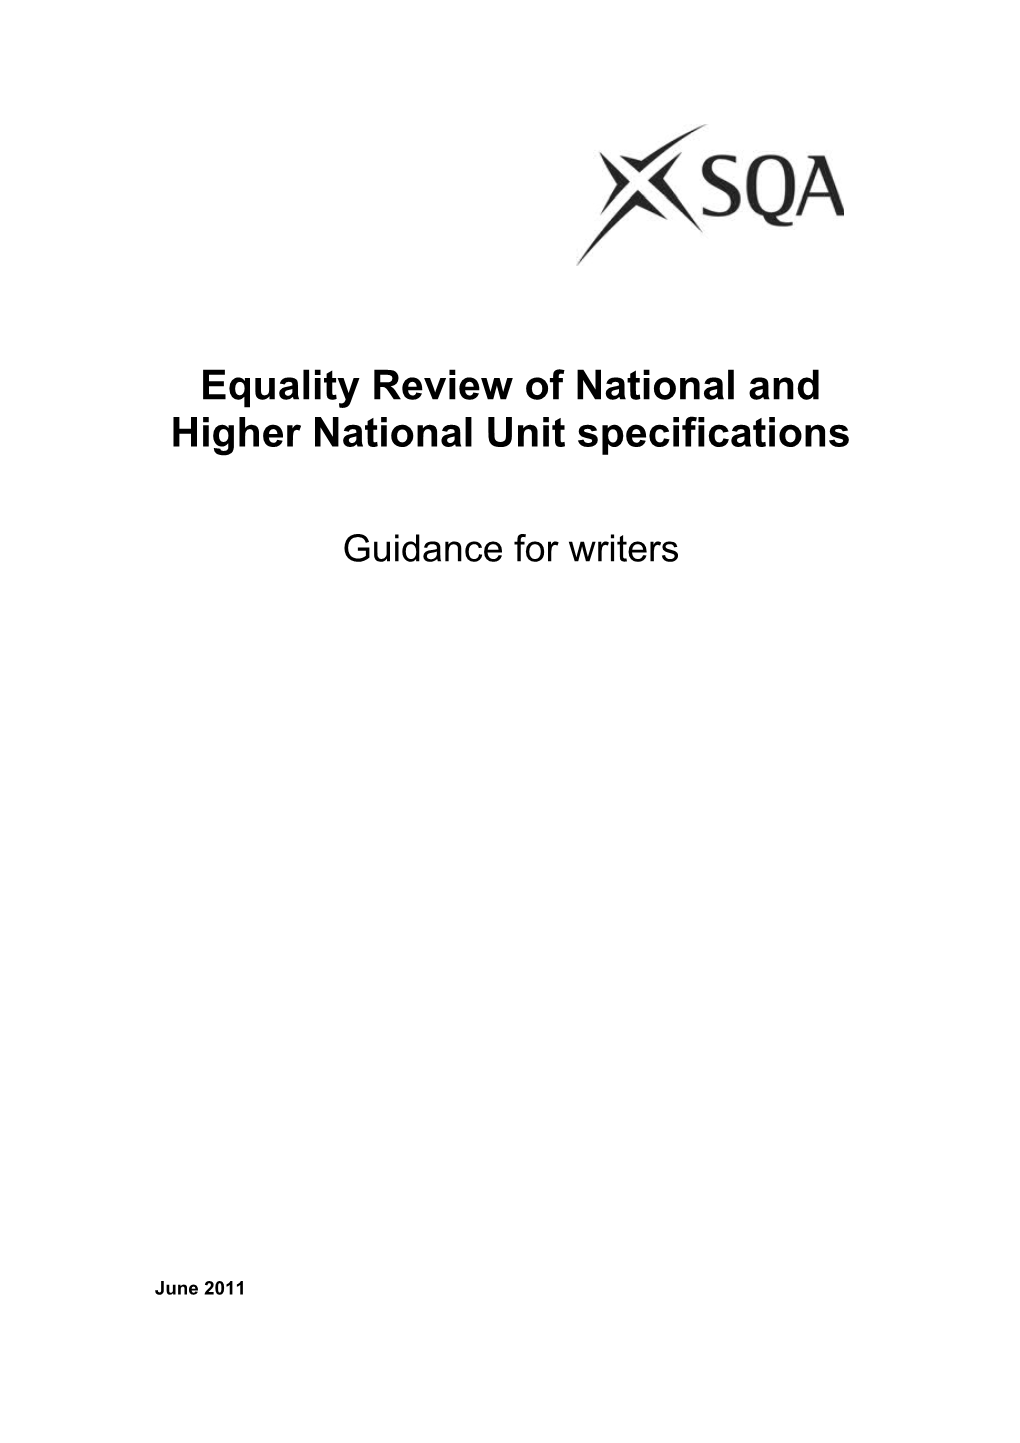 Equality Review of National and Higher National Unit Specifications